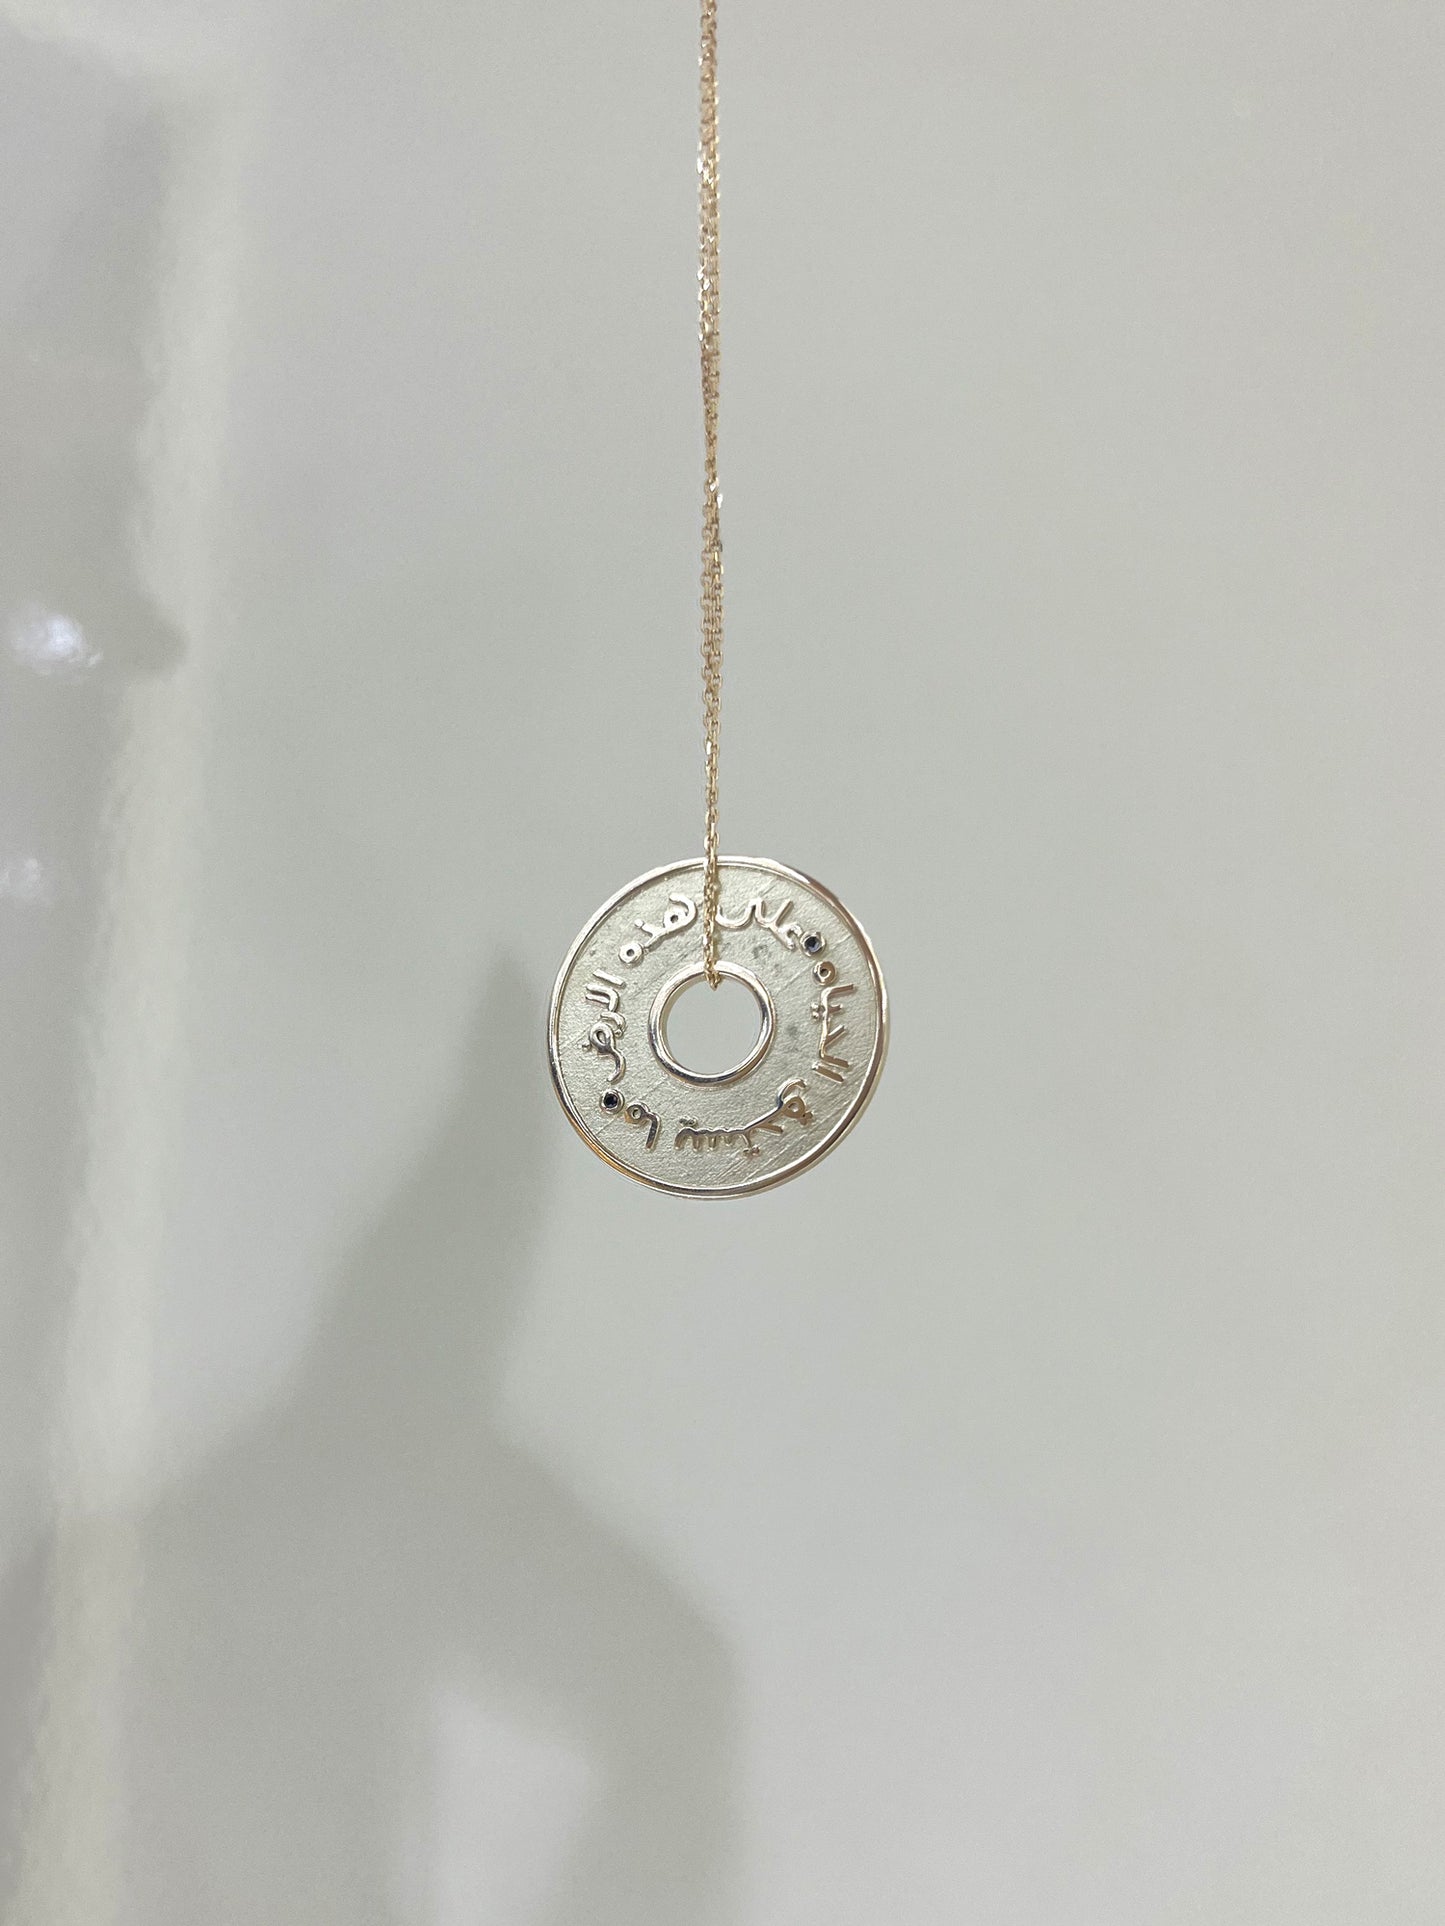 'On This Land' 14k gold coin necklace